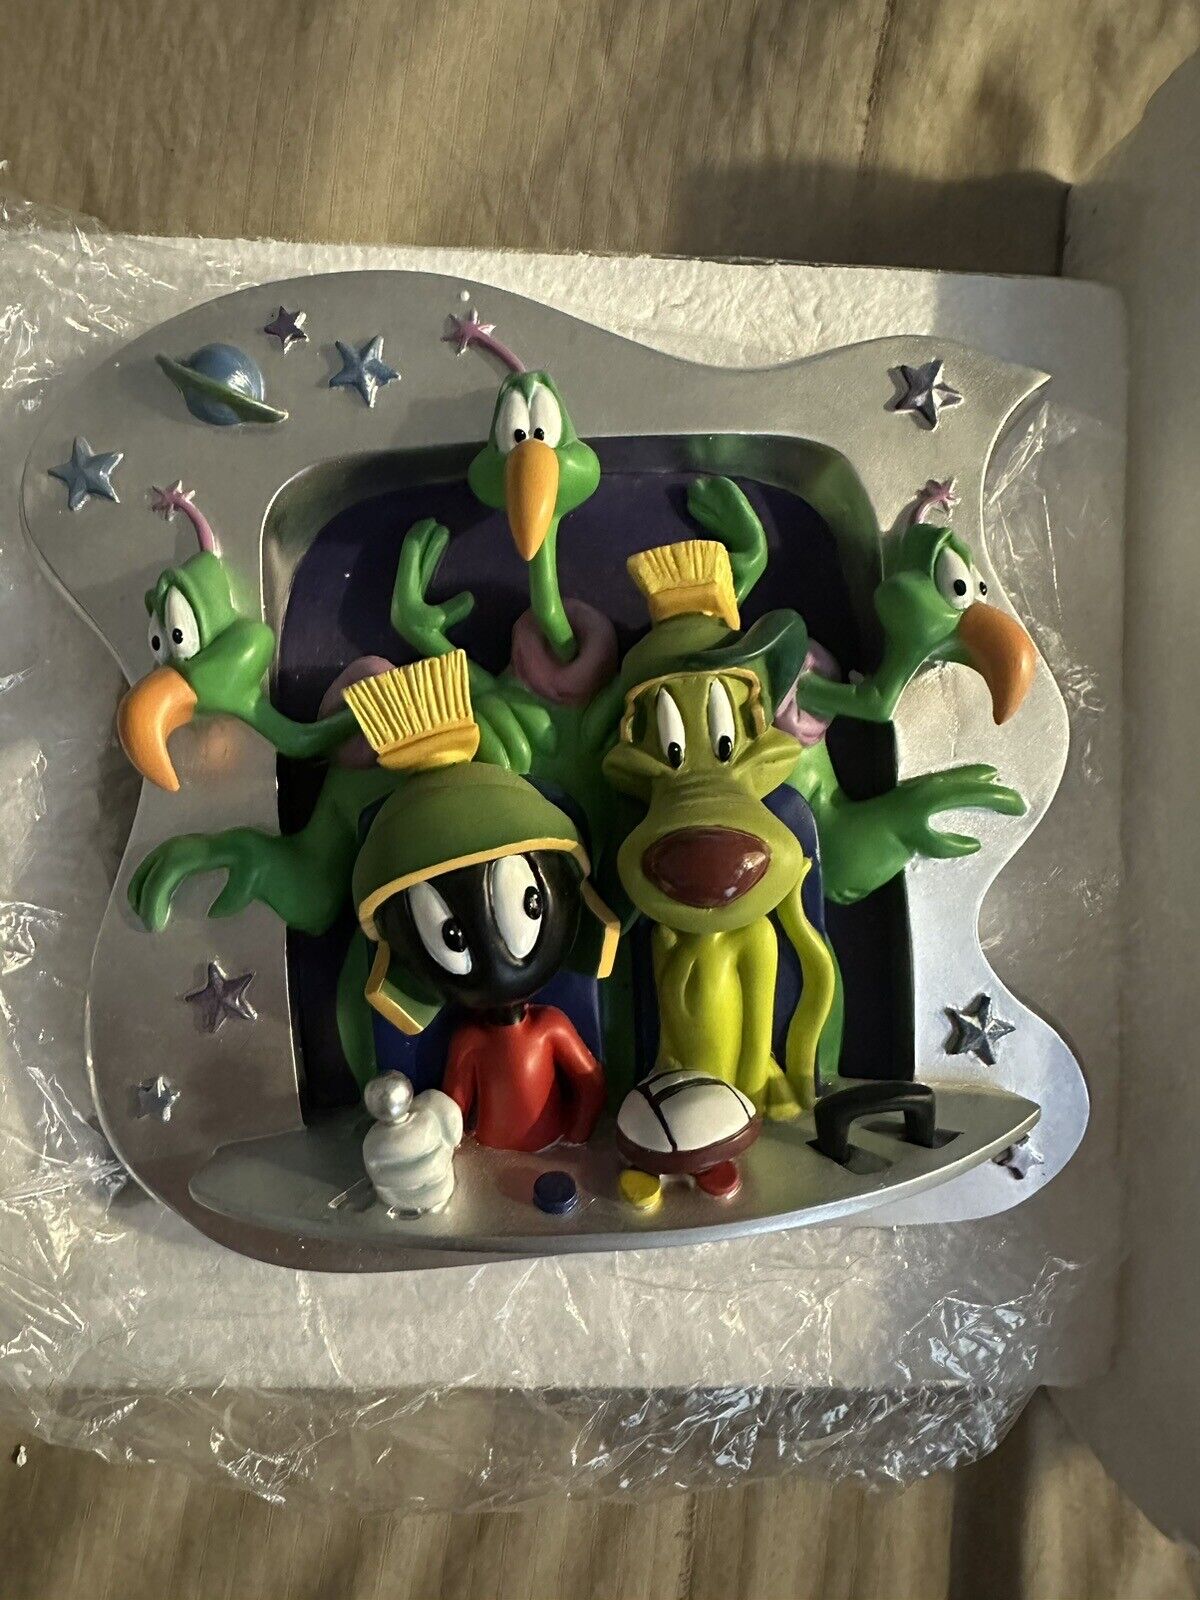 Extremely Rare Looney Tunes Marvin The Martian with K9 Dog LE of 2500 3D Statue